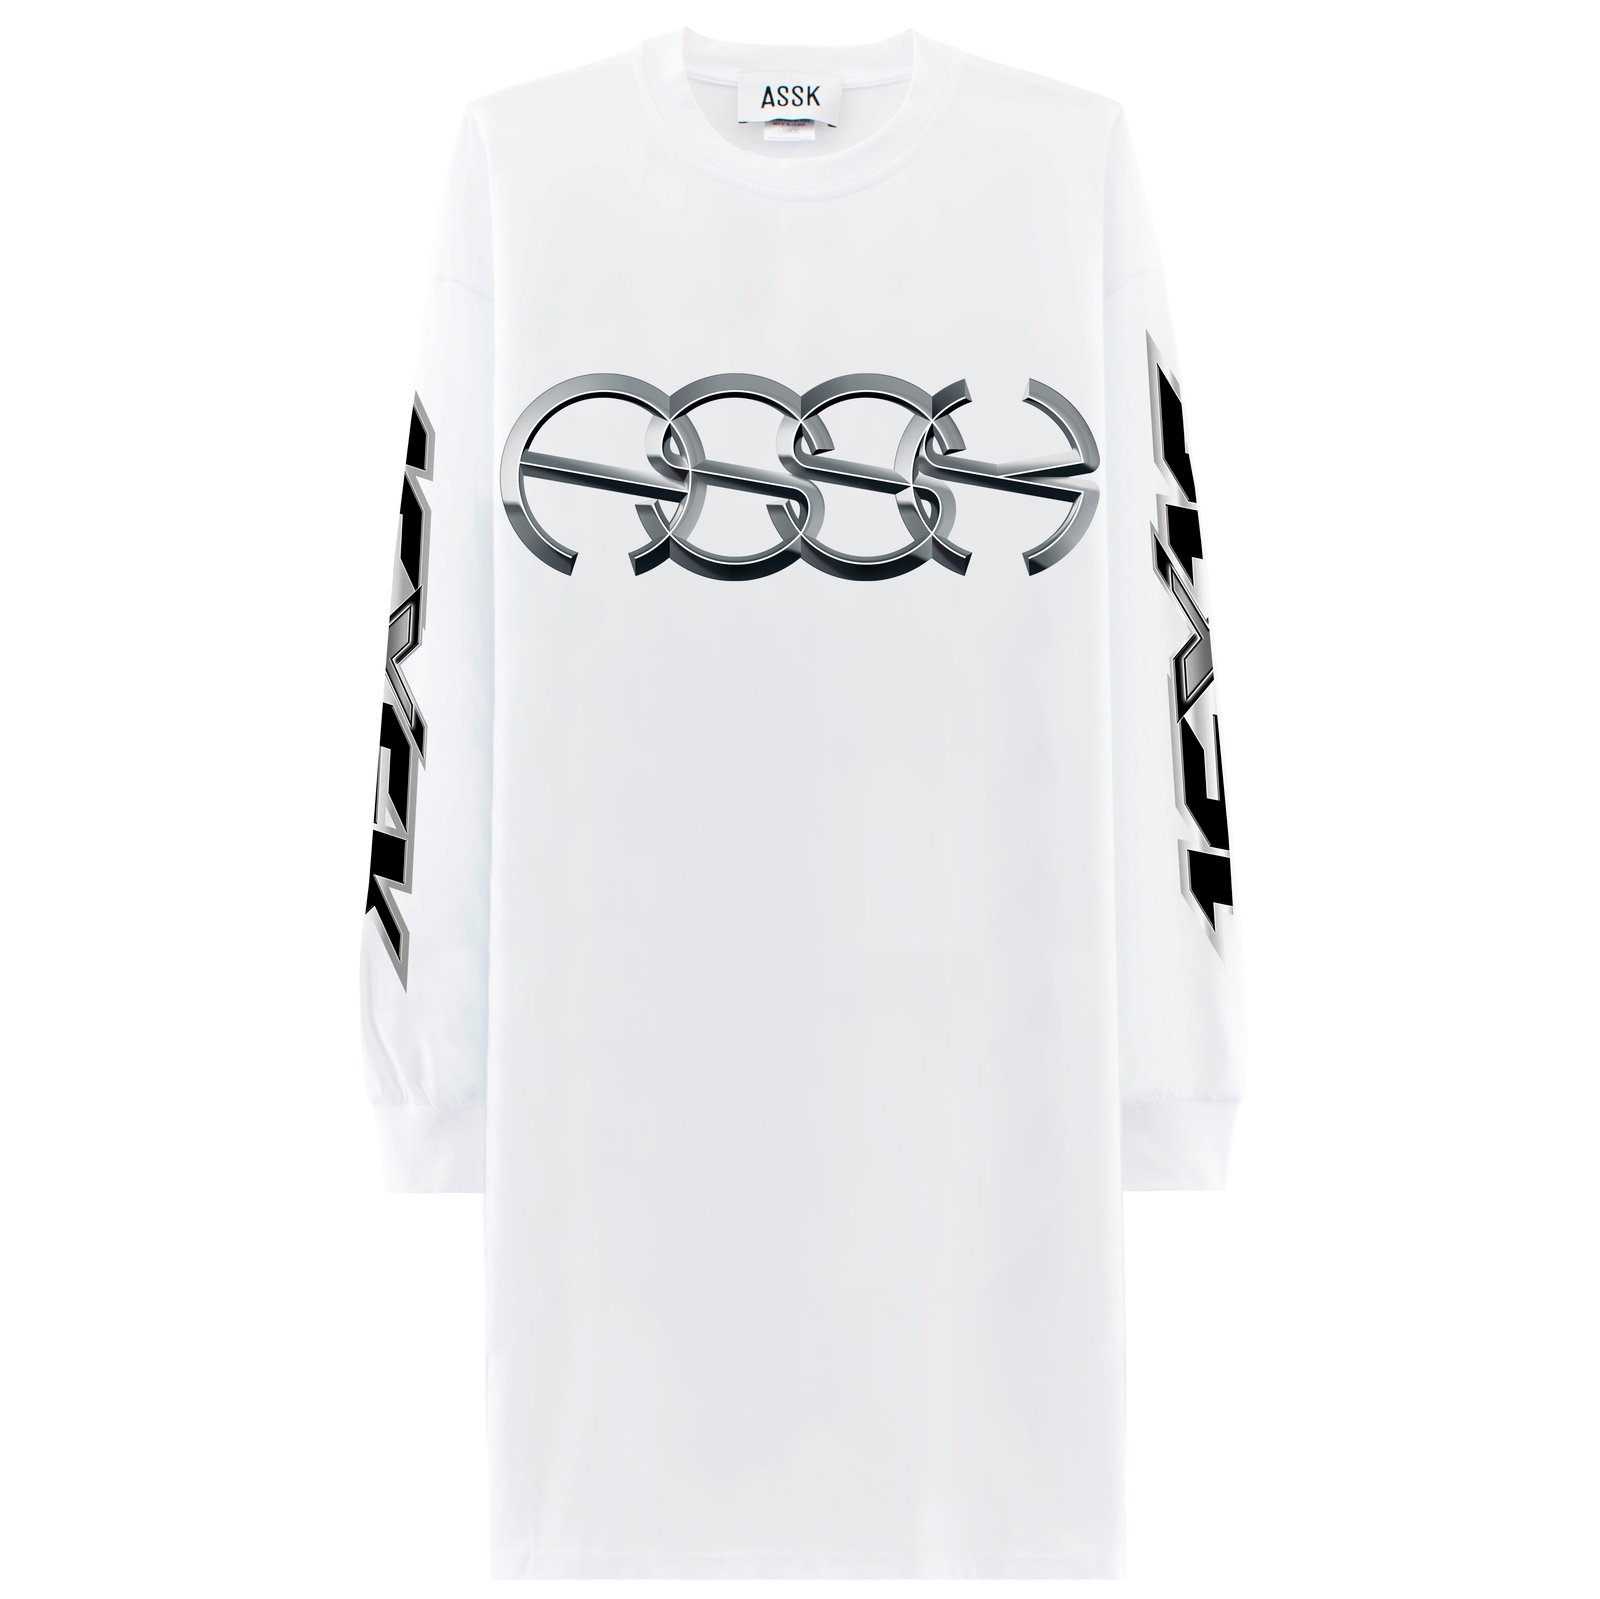 OFF ROAD T-shirt - White / ASSK